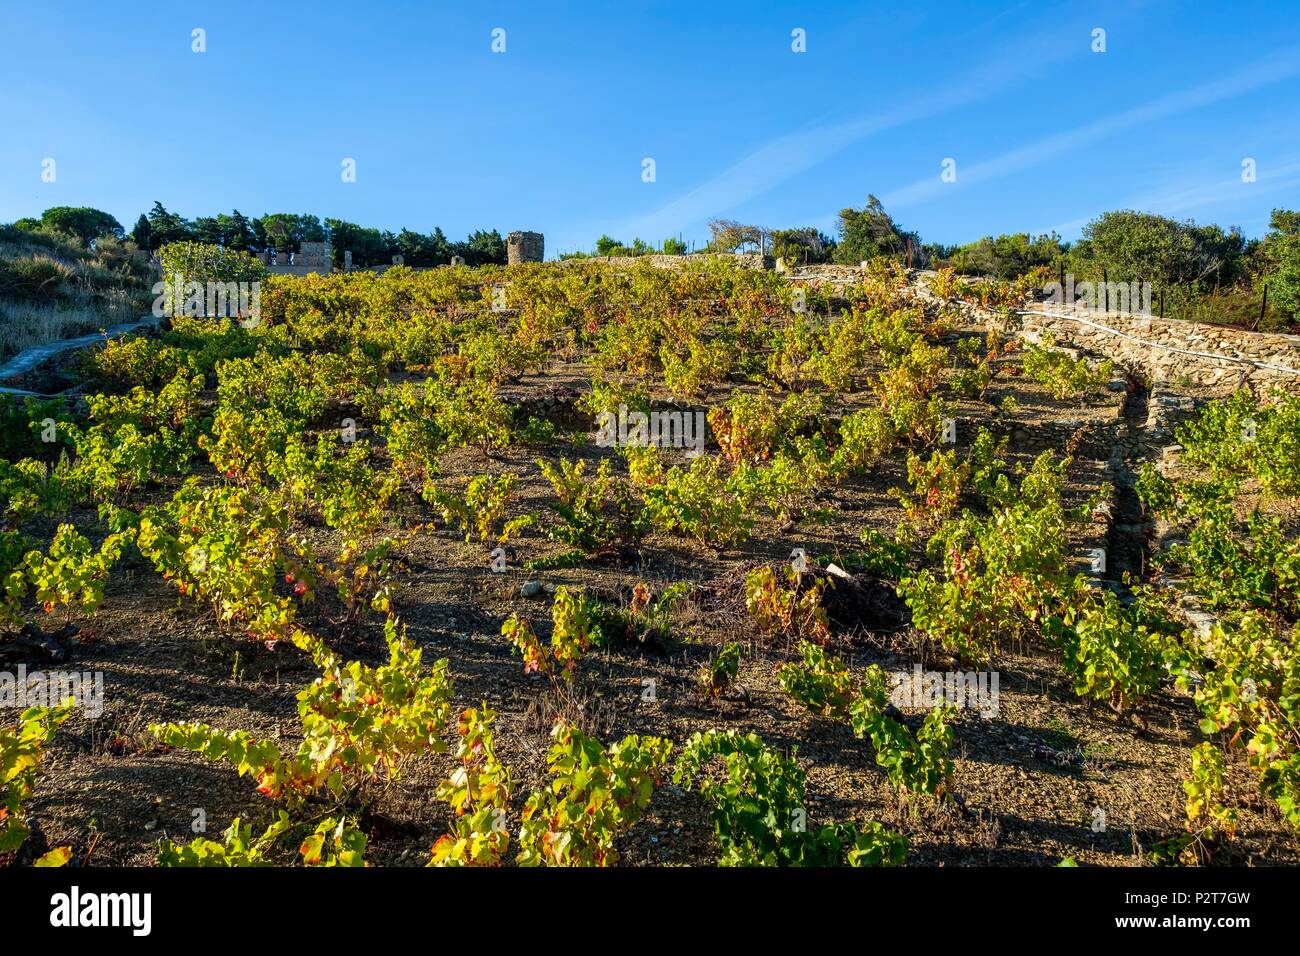 France, Pyrenees Orientales, Cote Vermeille, hiking from Banyuls sur Mer to Cerbere on the coastal path, Banyuls vineyard Stock Photo